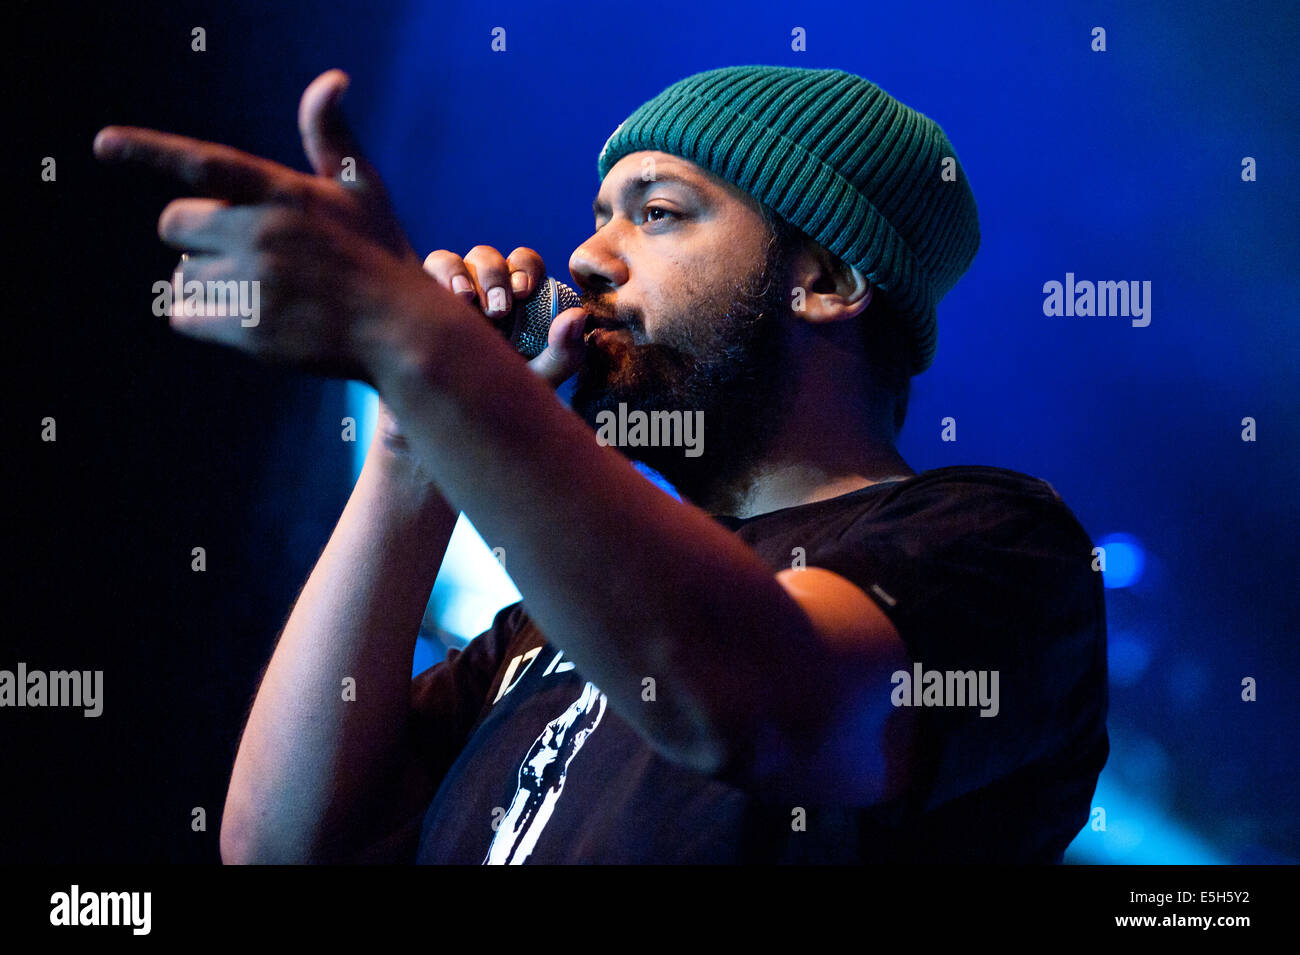 Freiburg, Germany. 31st July, 2014. German rapper and hip hop artist from Hamburg Samy Deluxe performed live with his band Dlx at the ZMF music festival in Freiburg, Germany. Photo: Miroslav Dakov/ Alamy Live News Stock Photo